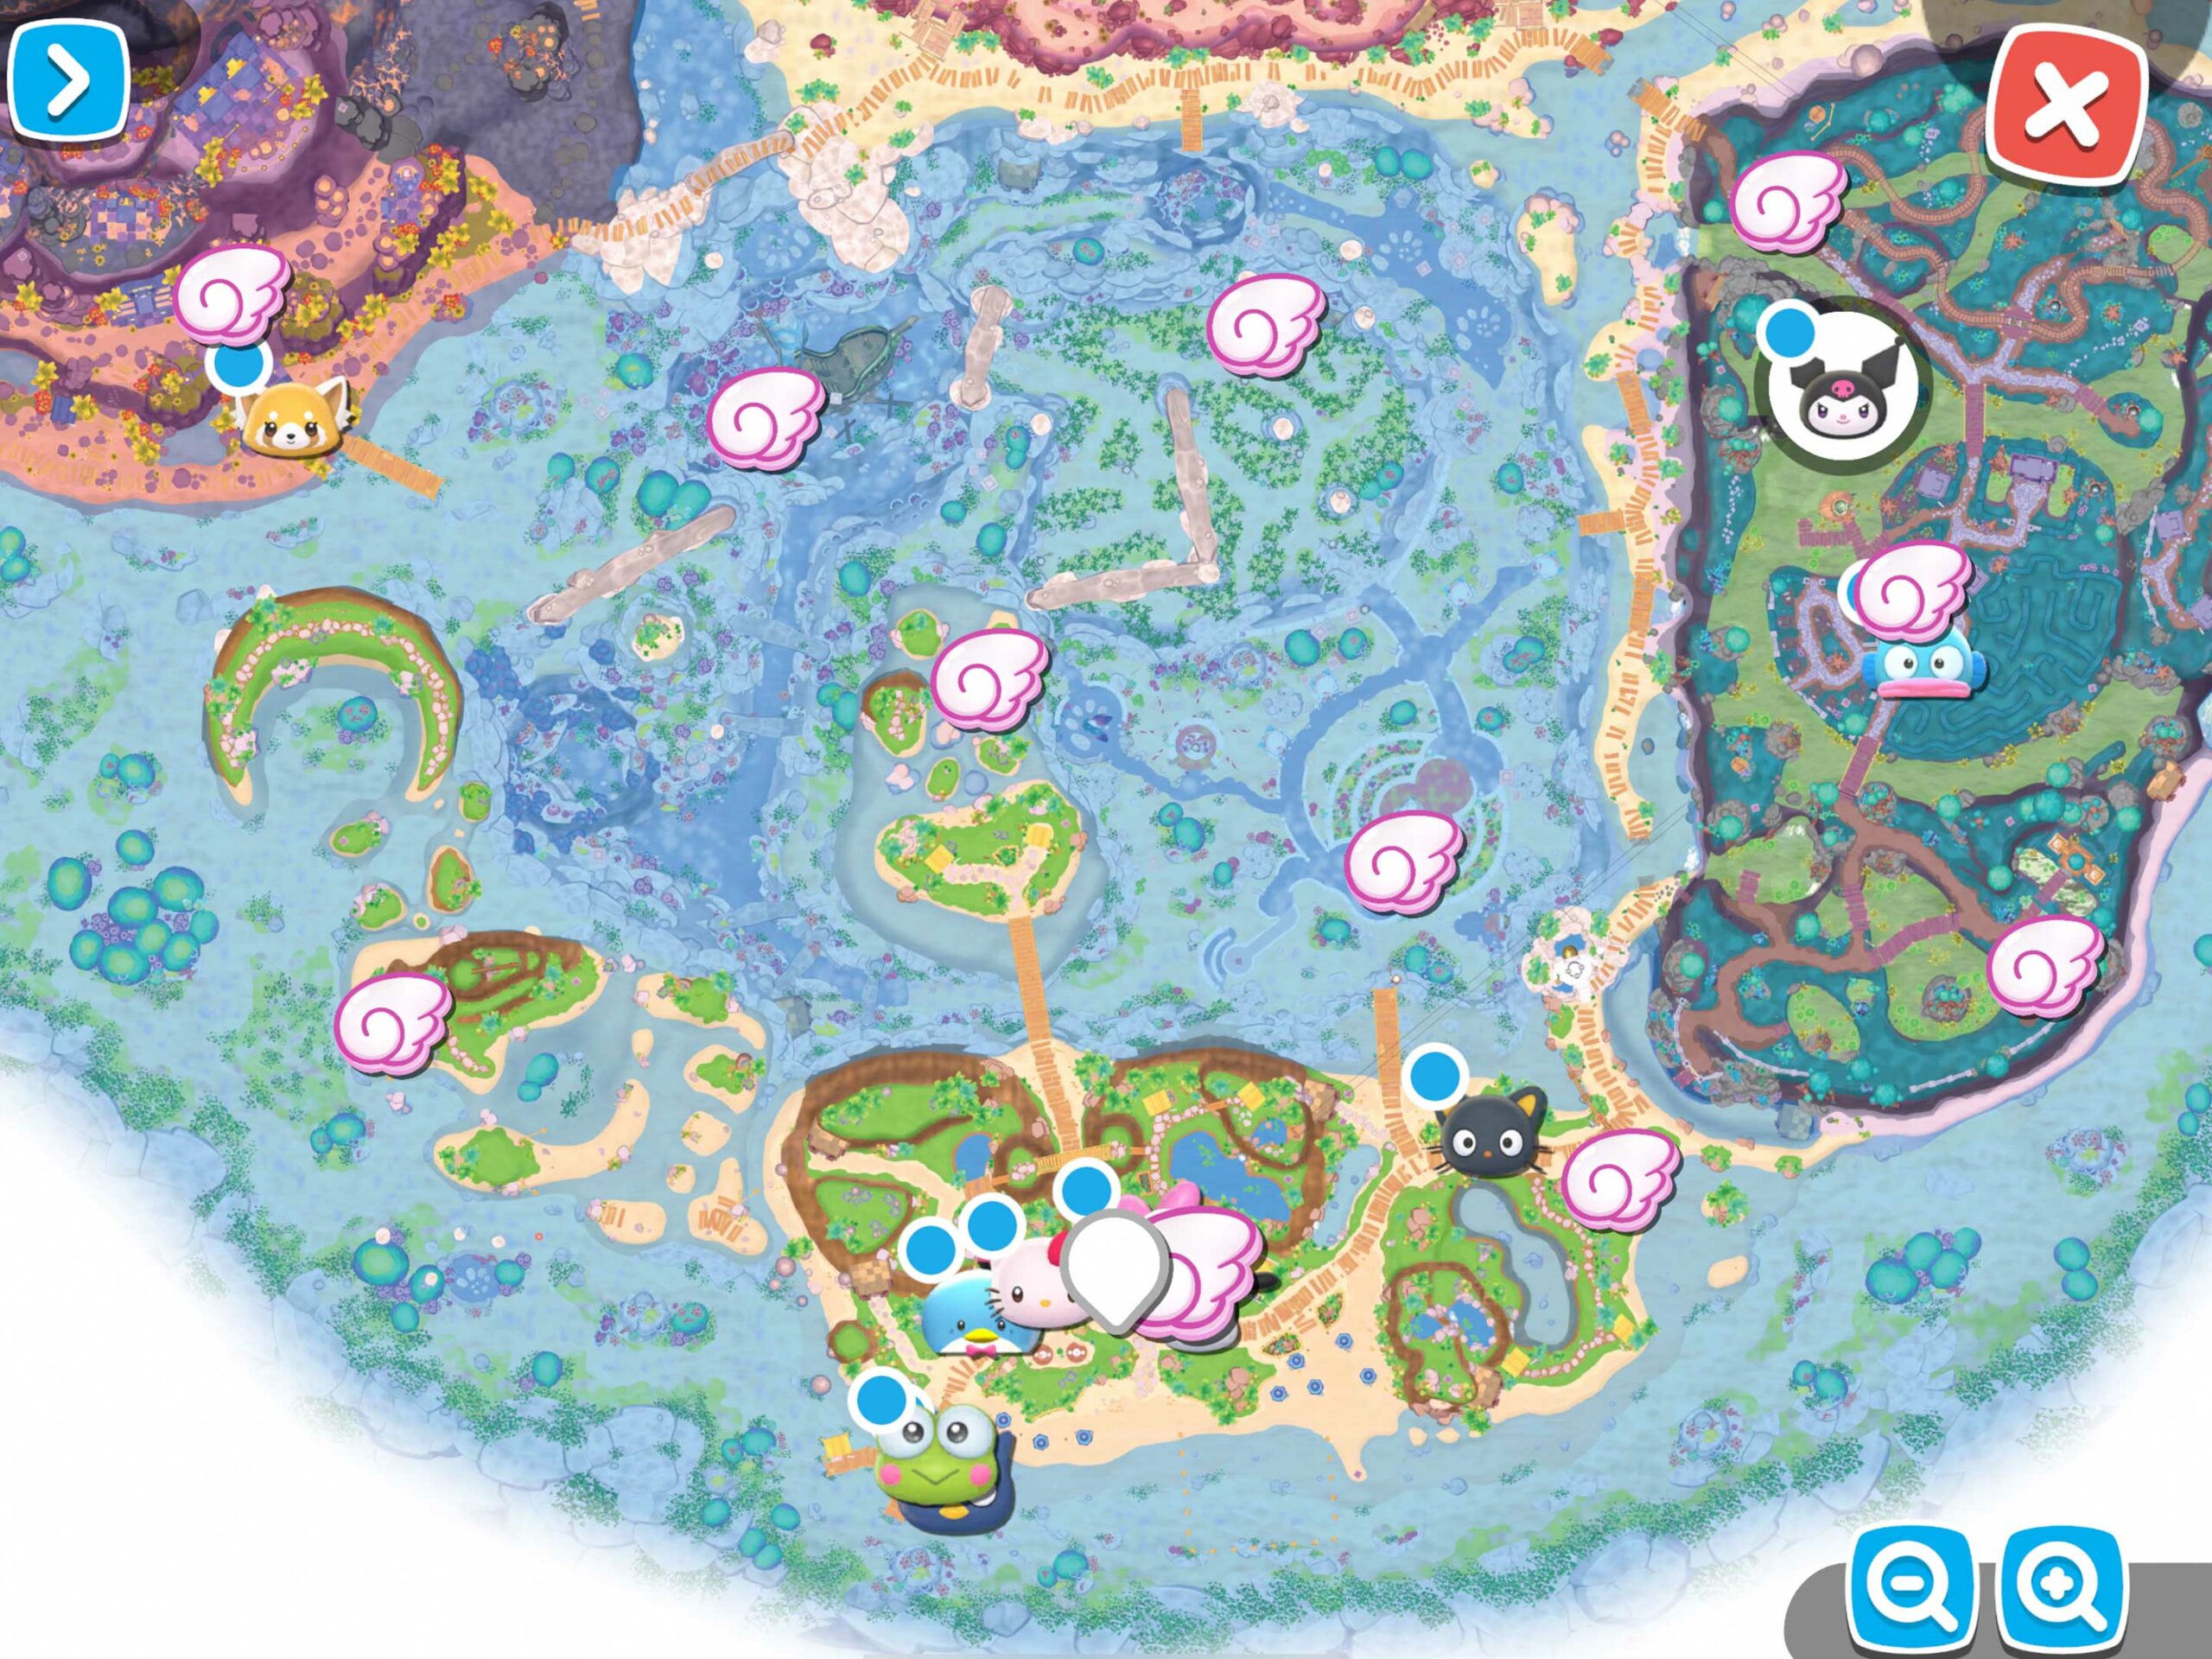 Hello Kitty Island Adventure release date and the rest you need to